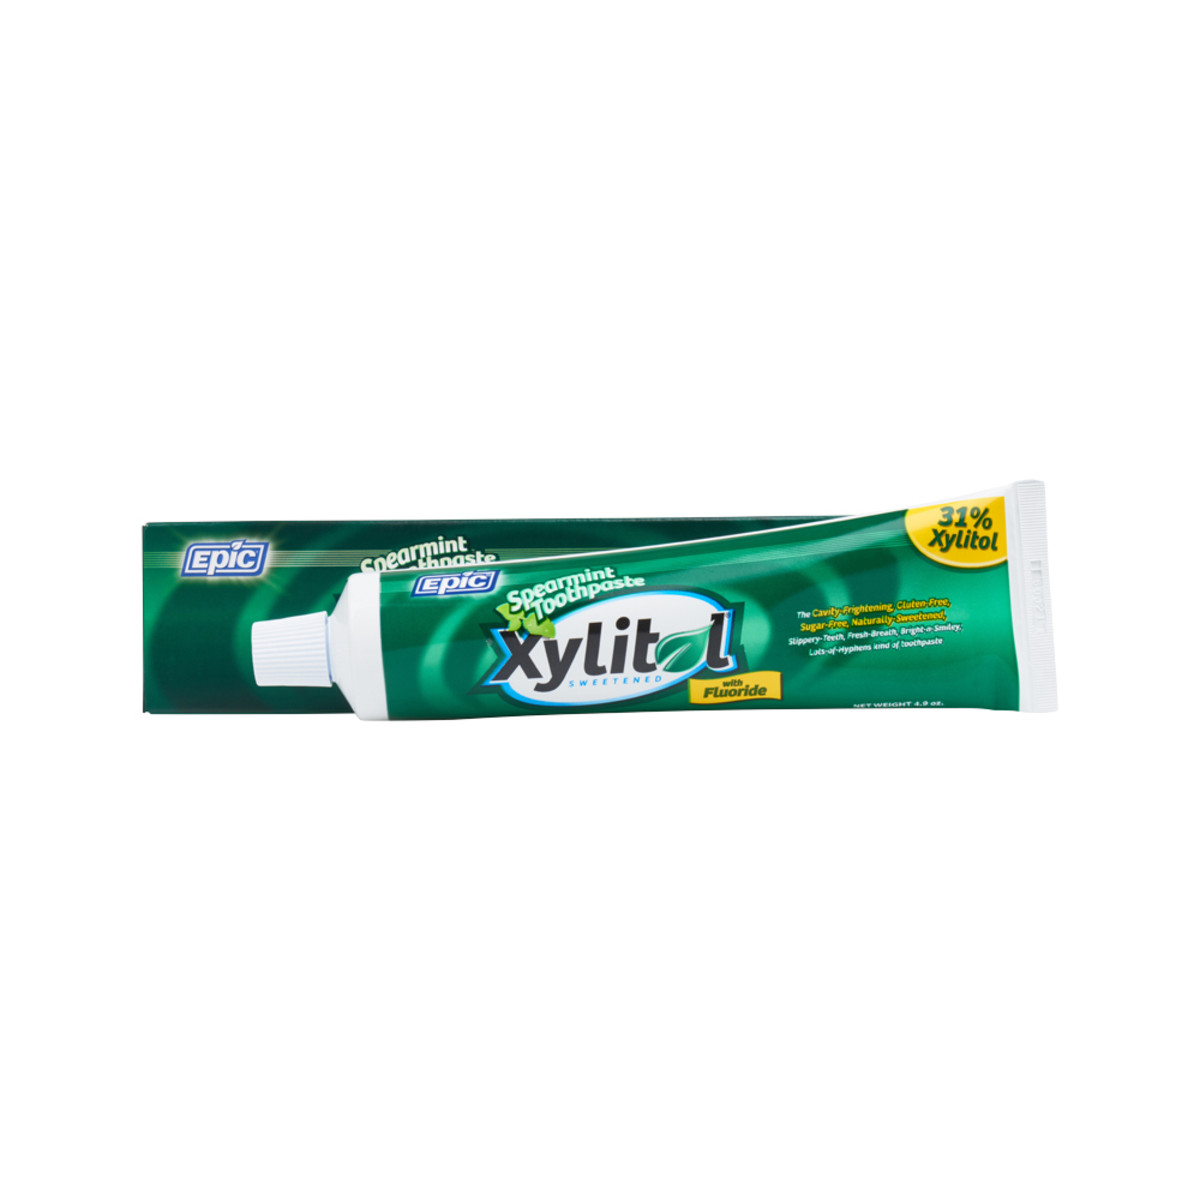 Epic Spearmint Toothpaste with Xylitol (with Fluoride) 4.9oz